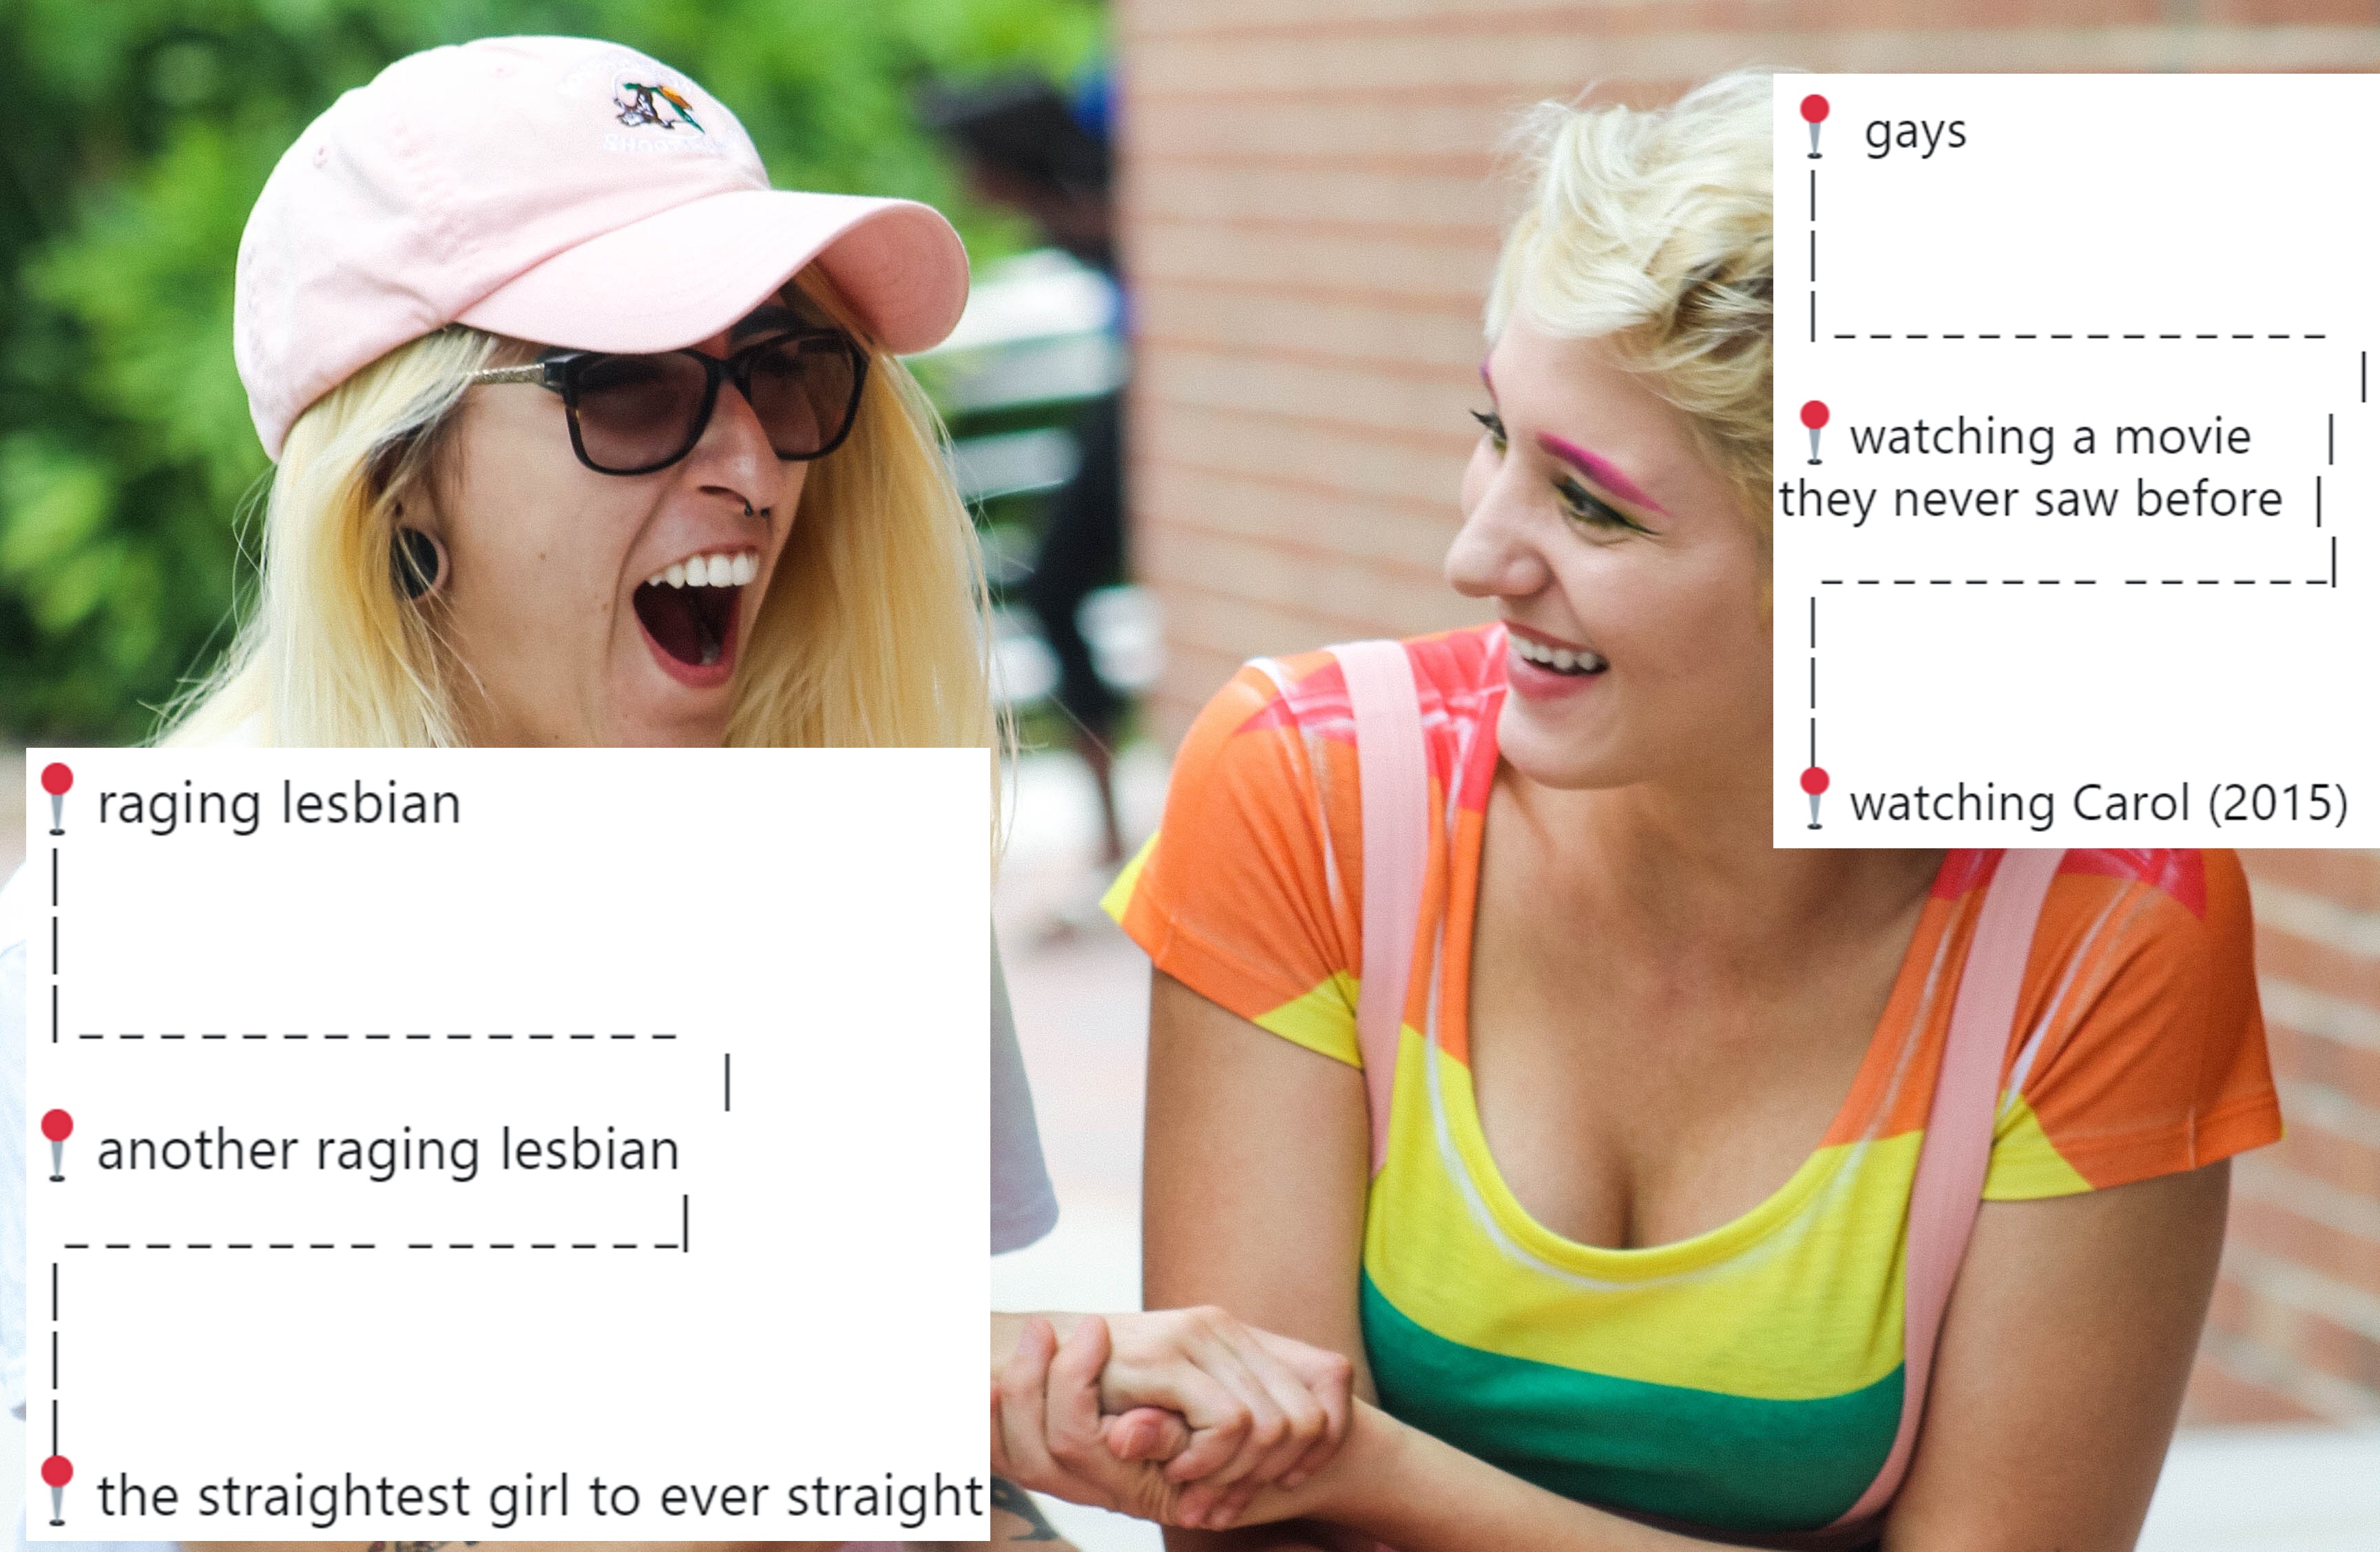 Lesbian Porn Memes - There's a new gay meme, and it's extremely sassy | PinkNews